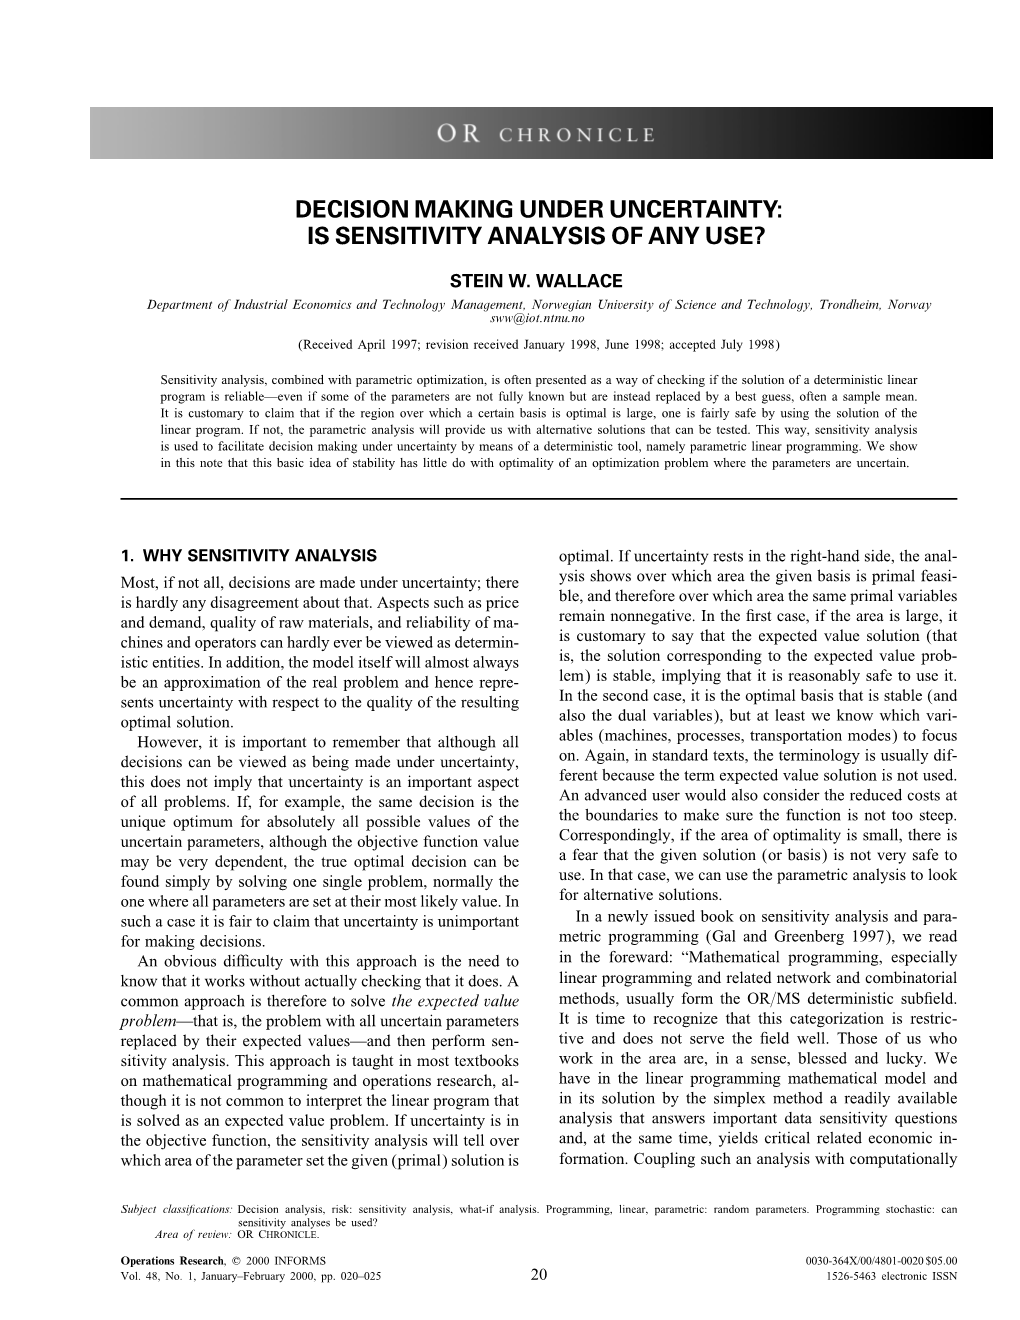 Decision Making Under Uncertainty: Is Sensitivity Analysis of Any Use?